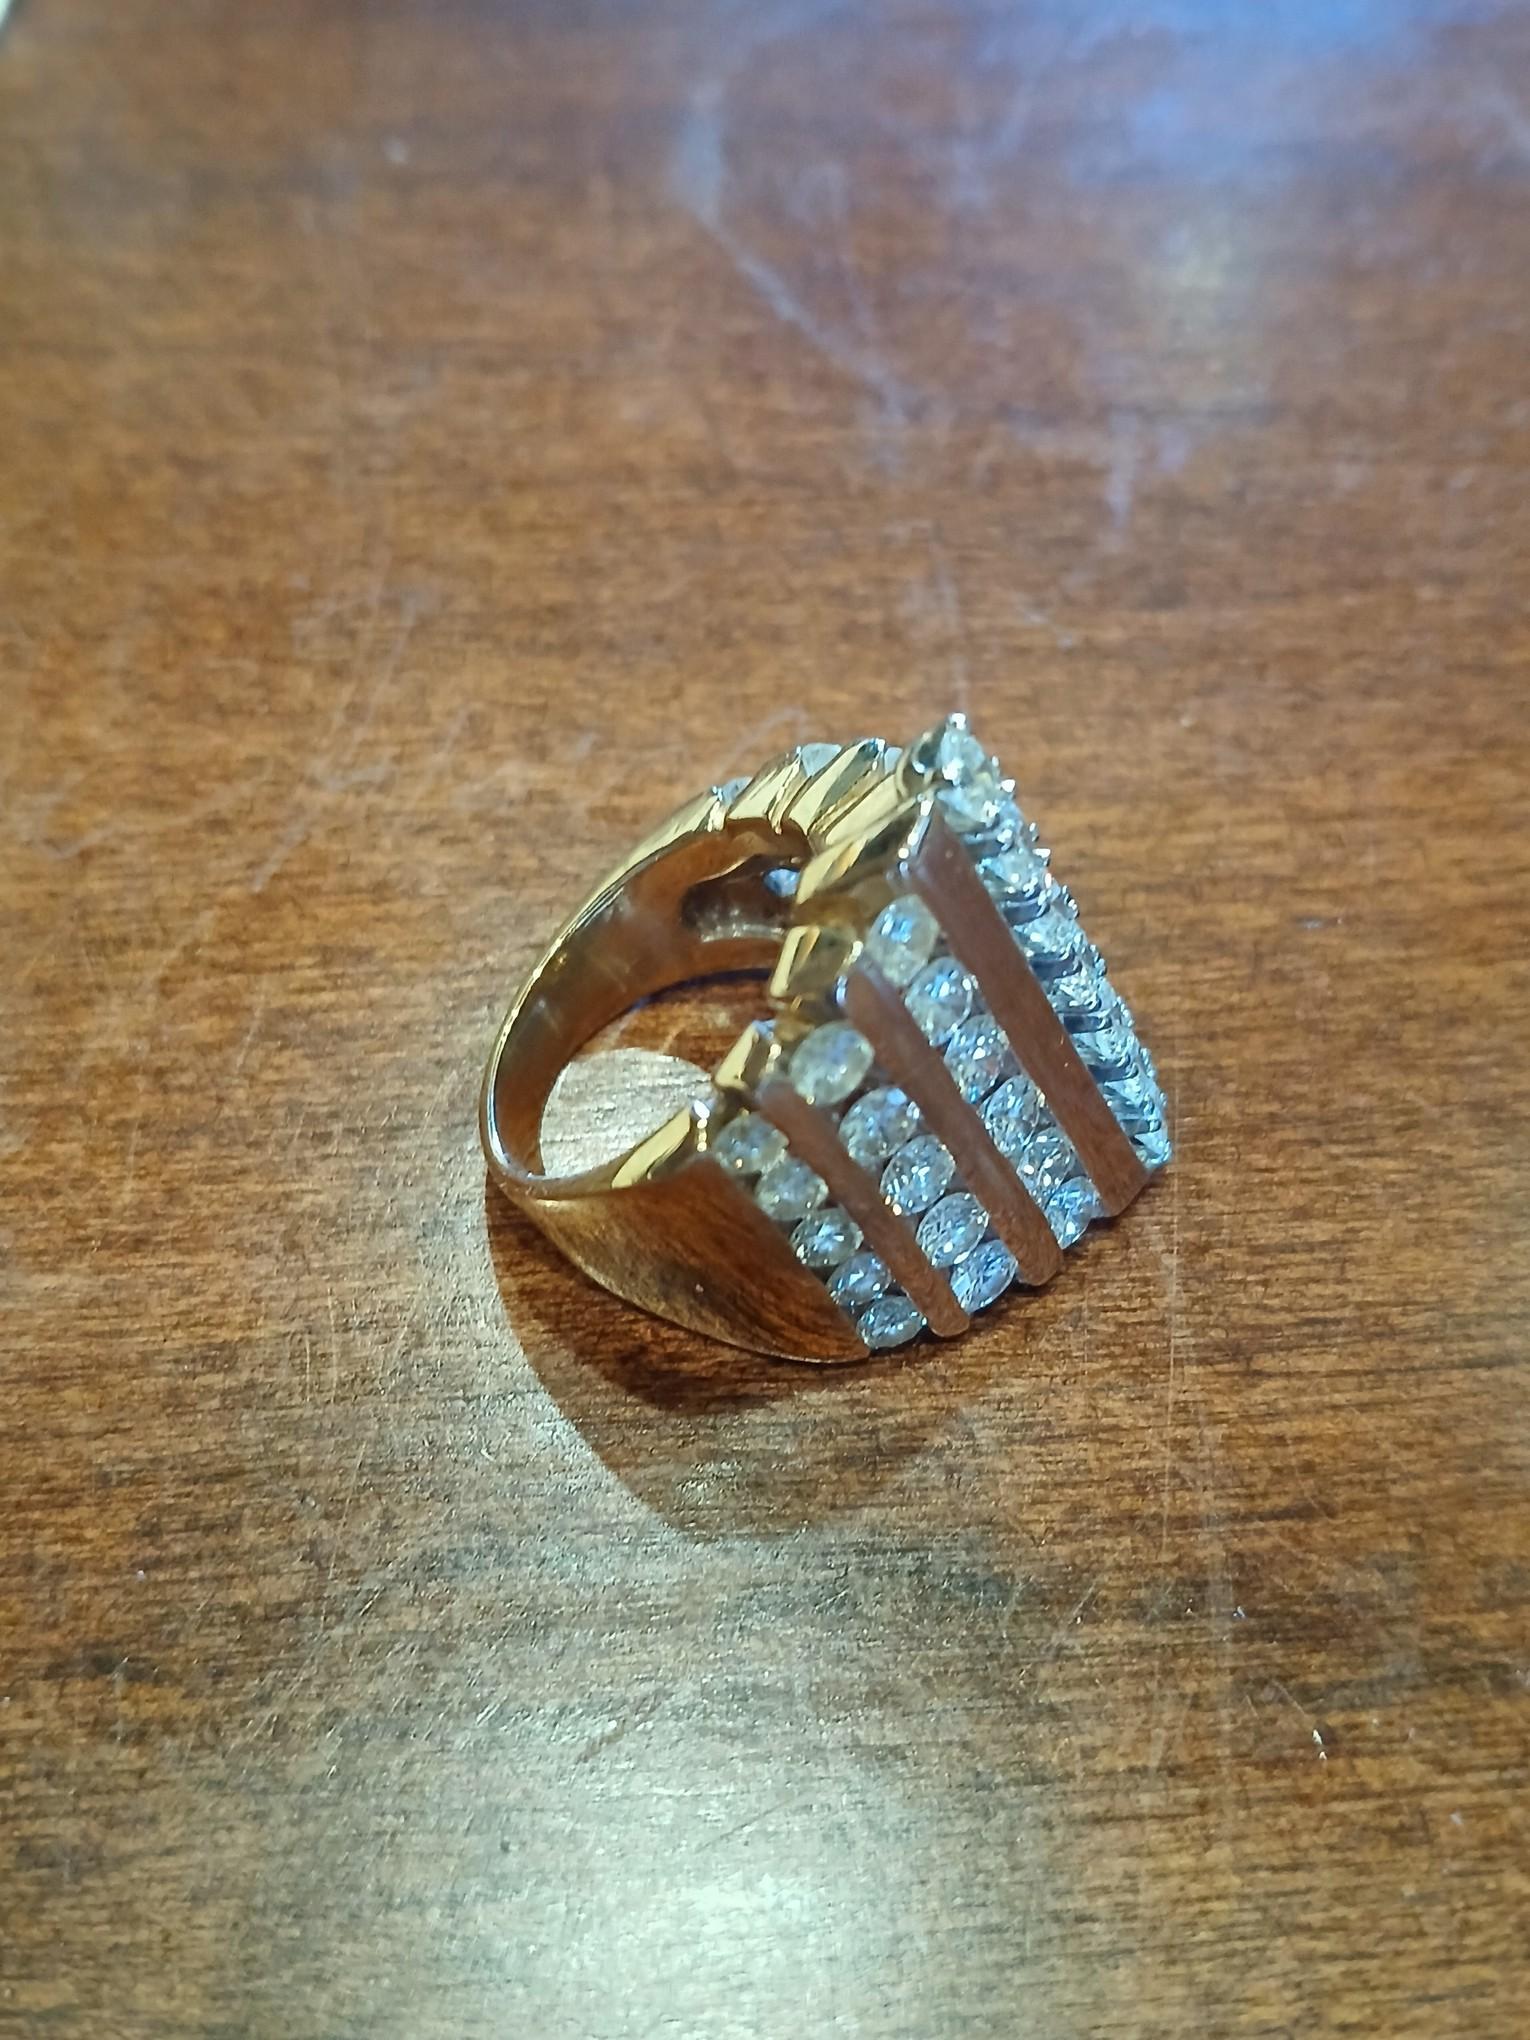 14K Gold Diamond Ladies Ring / 22.3 Grams of 14K gold. The ring is a 7 channel ring, very heavy gold